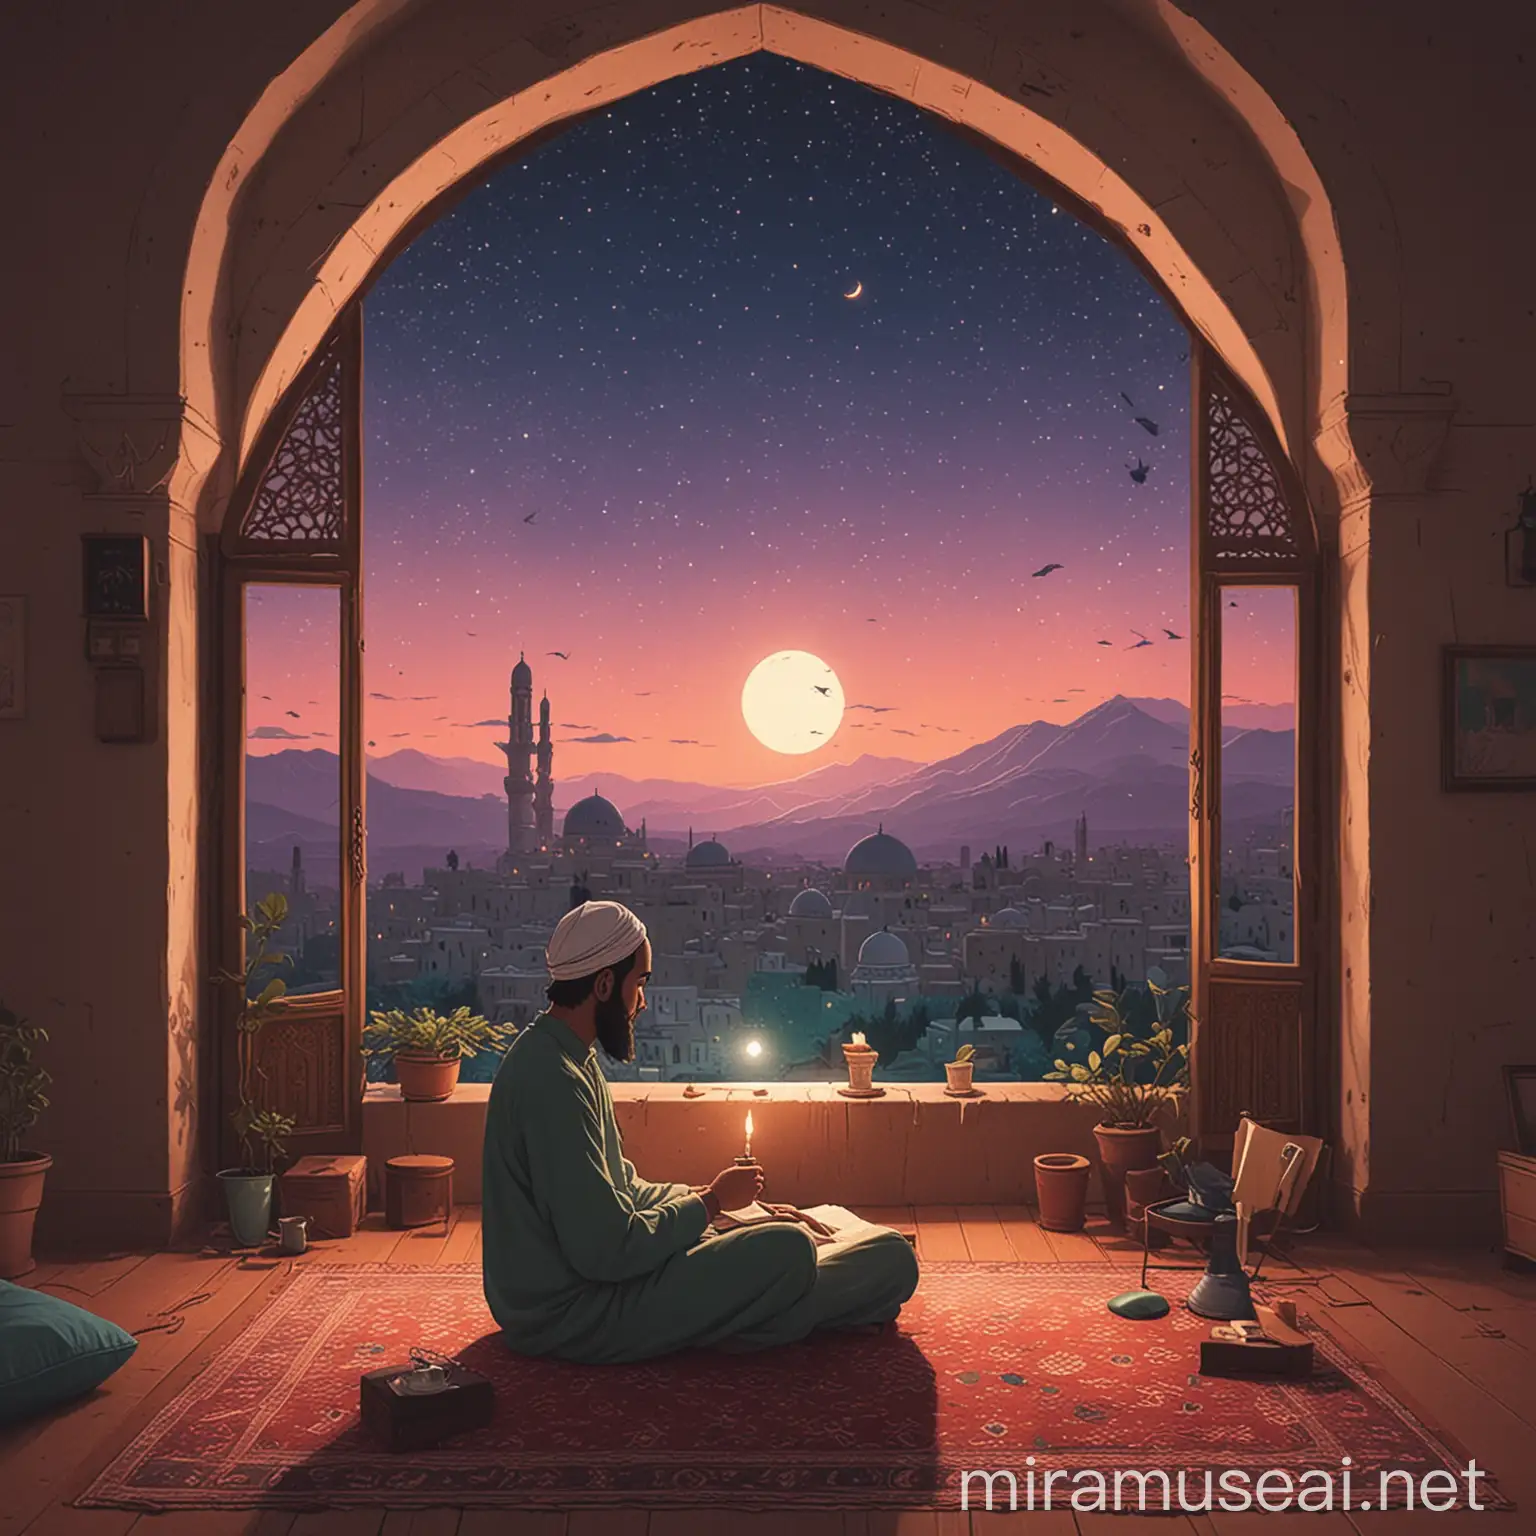 Islamic Lofi Night Tranquil Mosque Silhouetted Against Starry Sky